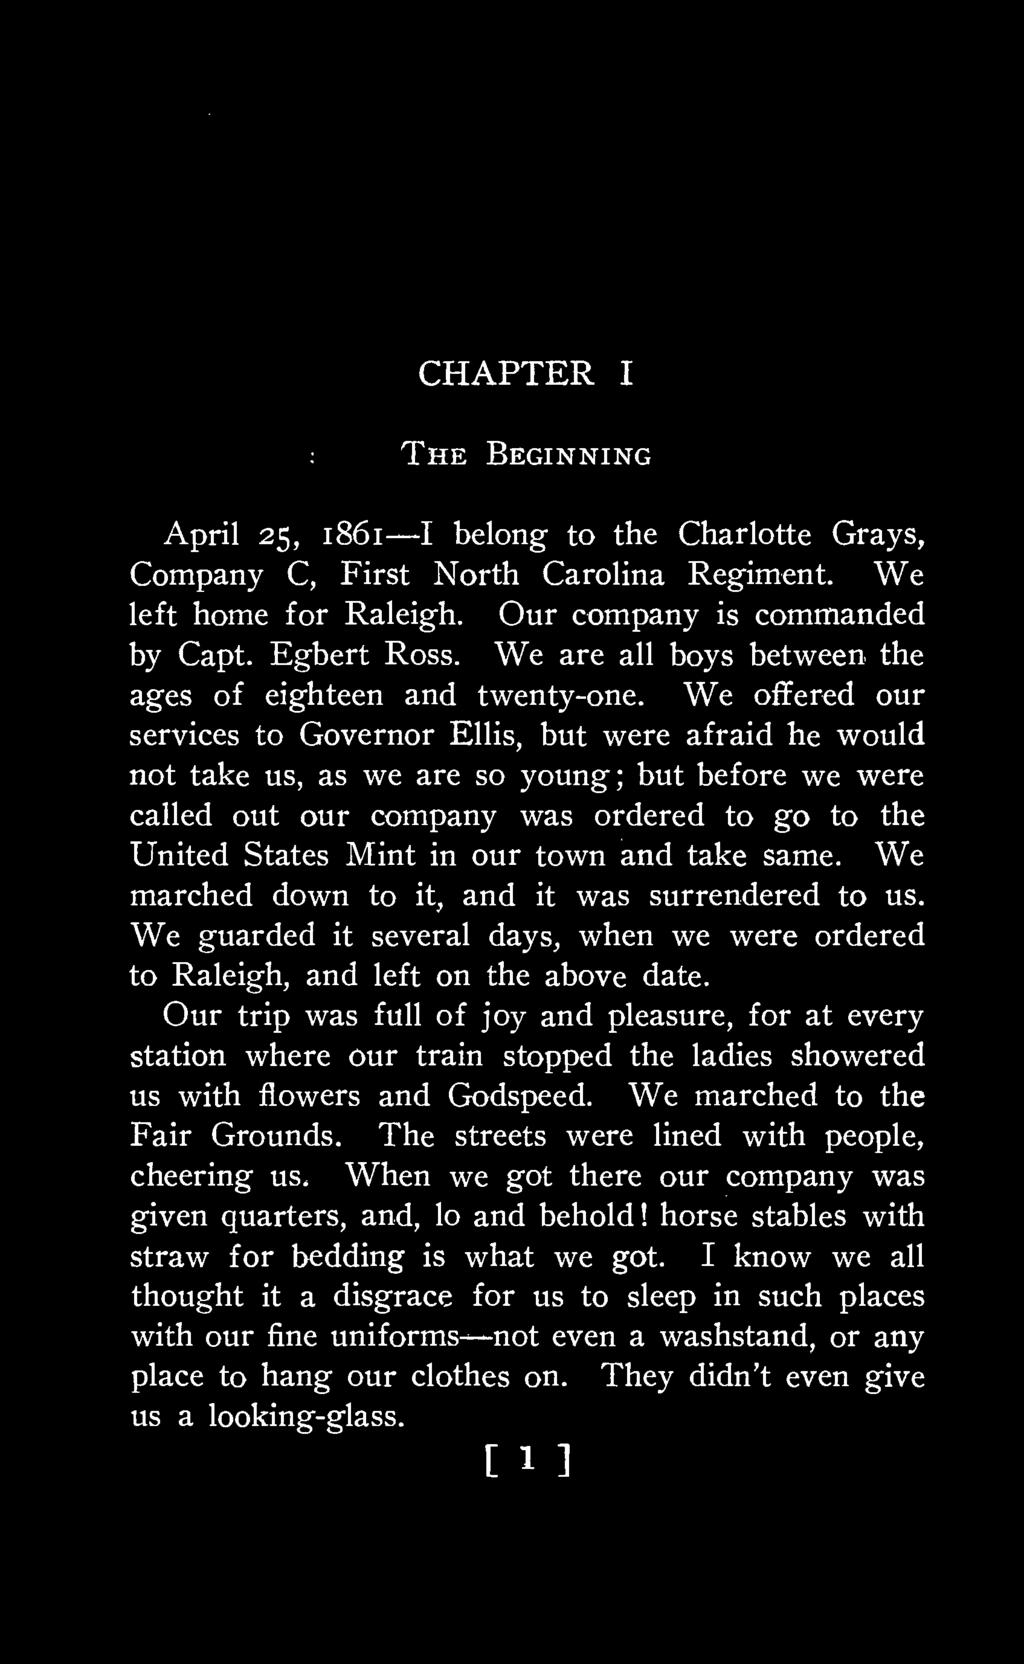 CHAPTER I The Beginning April 25, 1861 I belong to the Charlotte Grays, Company C, First North Carolina Regiment. We left home for Raleigh. Our company is commanded by Capt. Egbert Ross.